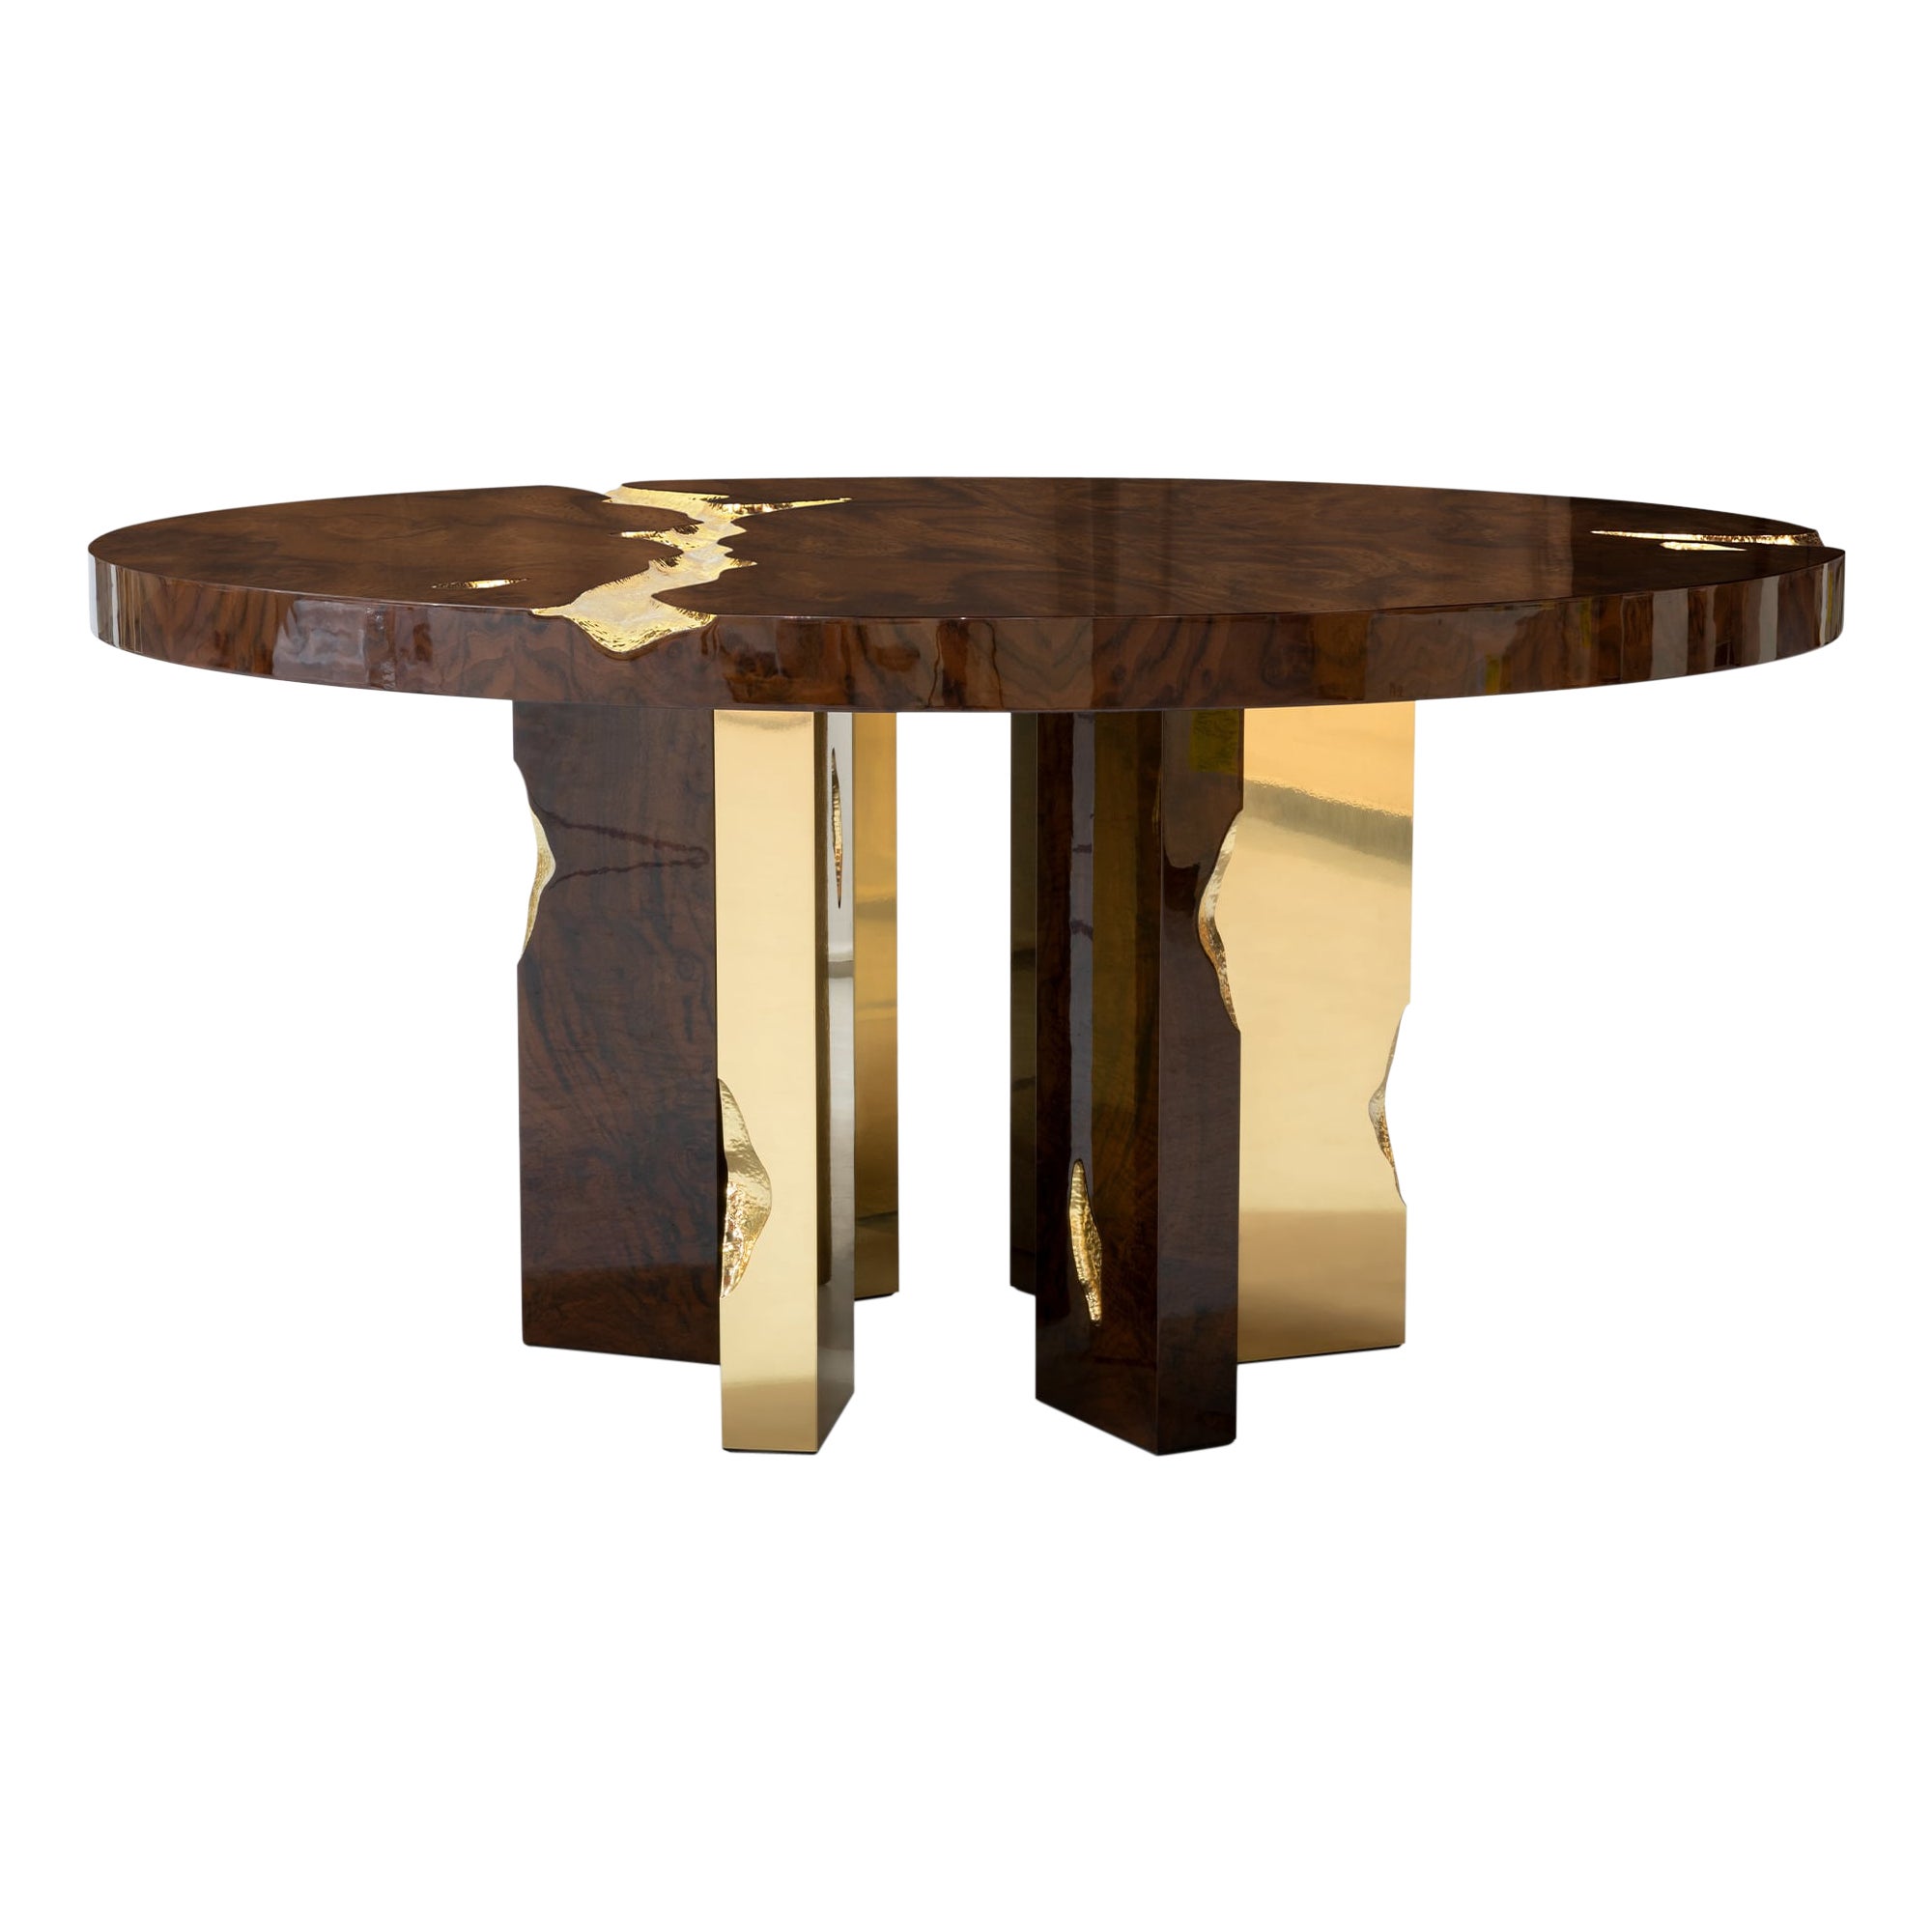 Empire Round Dining Table in Mahogany Wood and Brass Details by Boca Do Lobo For Sale